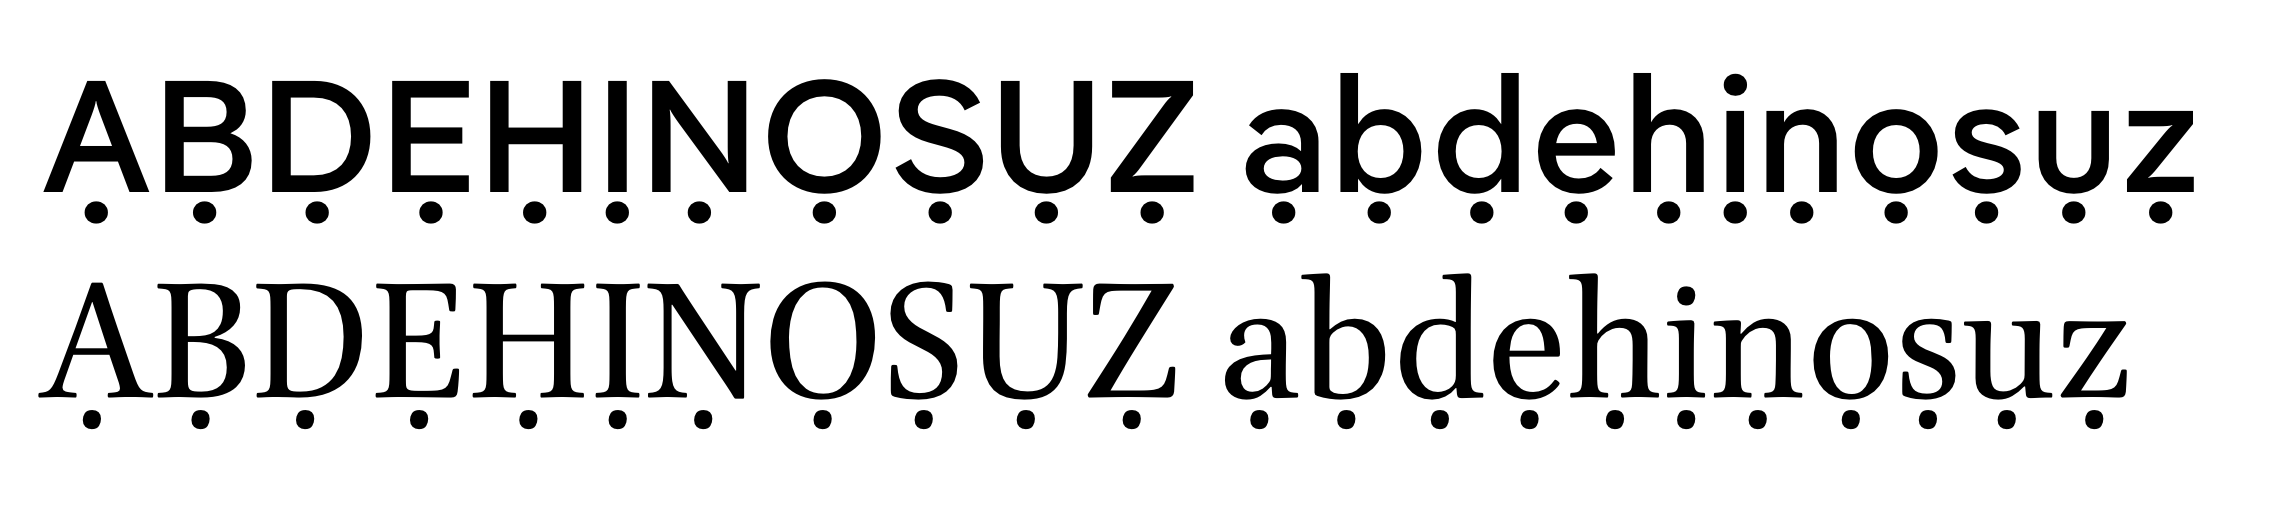 Composite letters with dot below